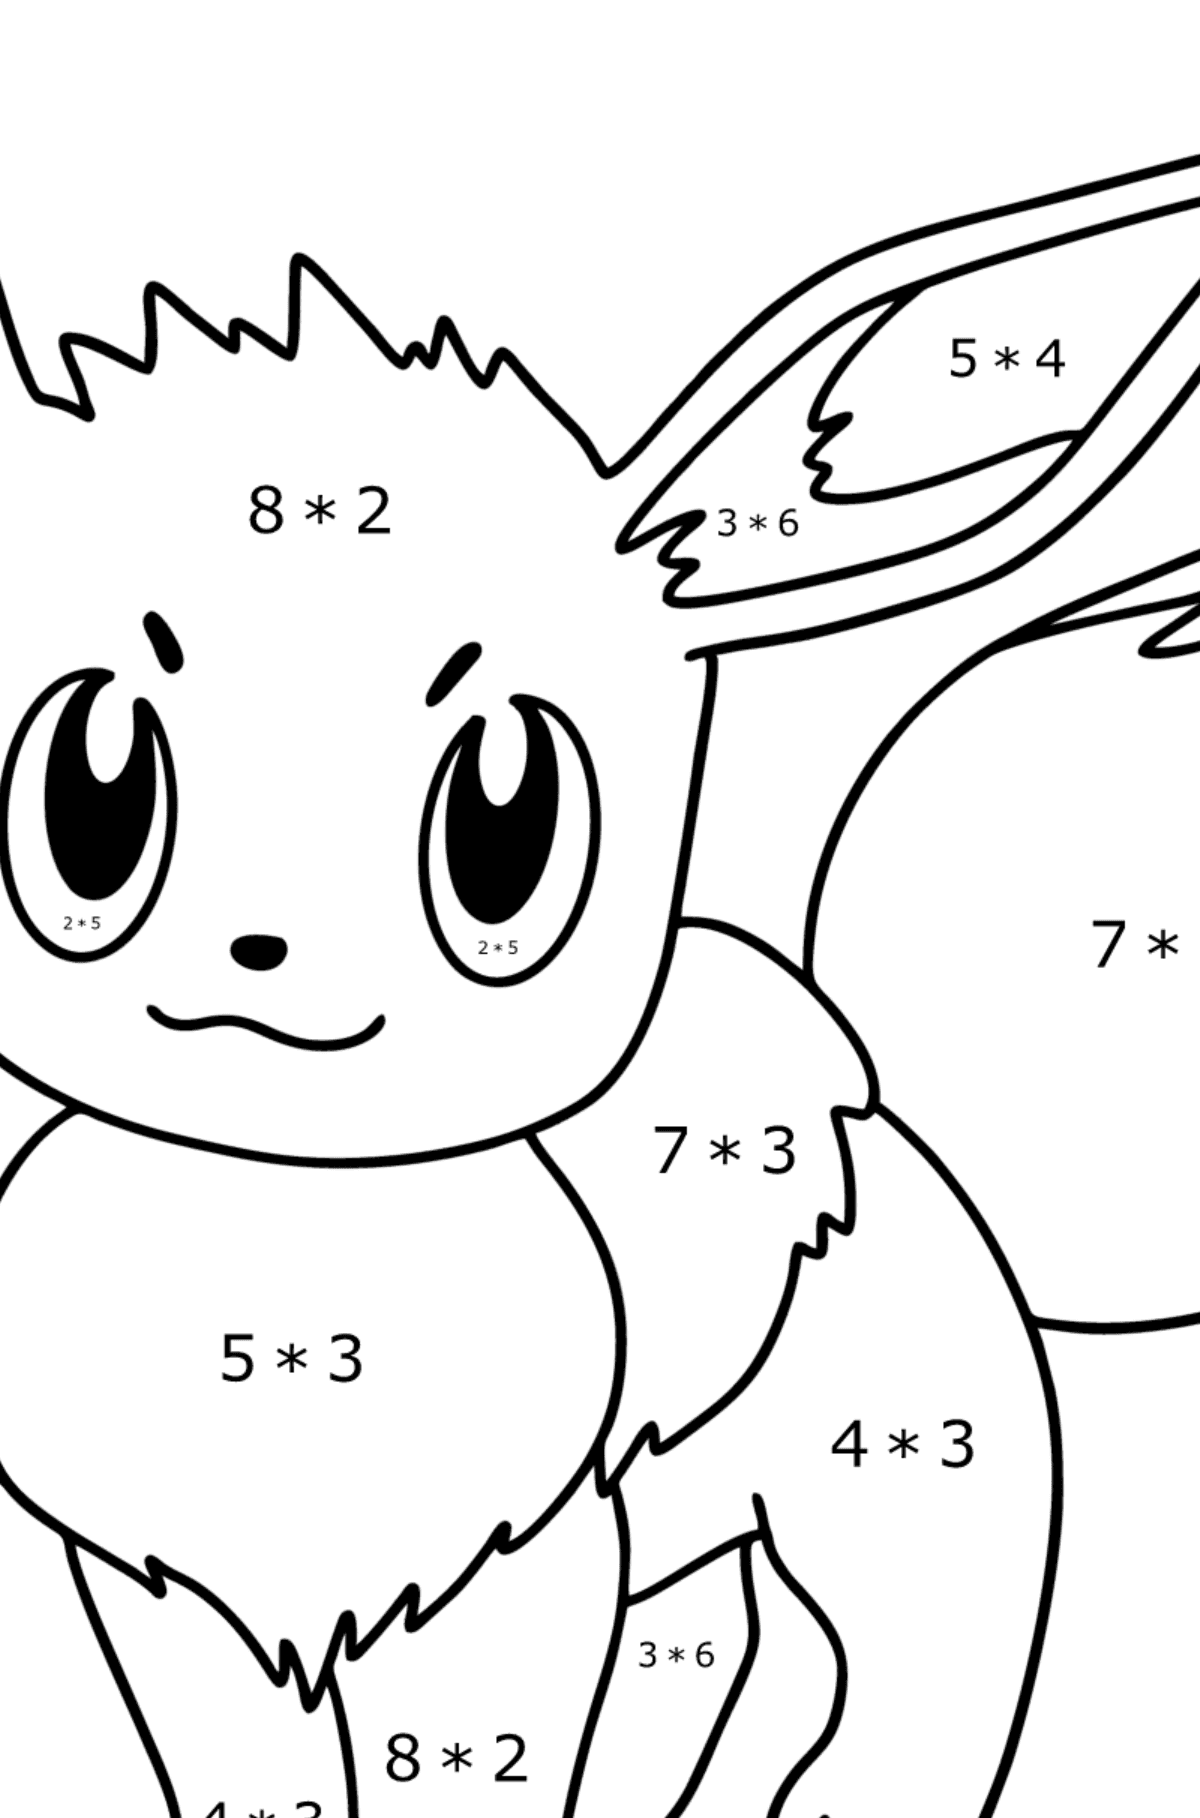 Pokemon Go Eevee coloring page - Math Coloring - Multiplication for Kids